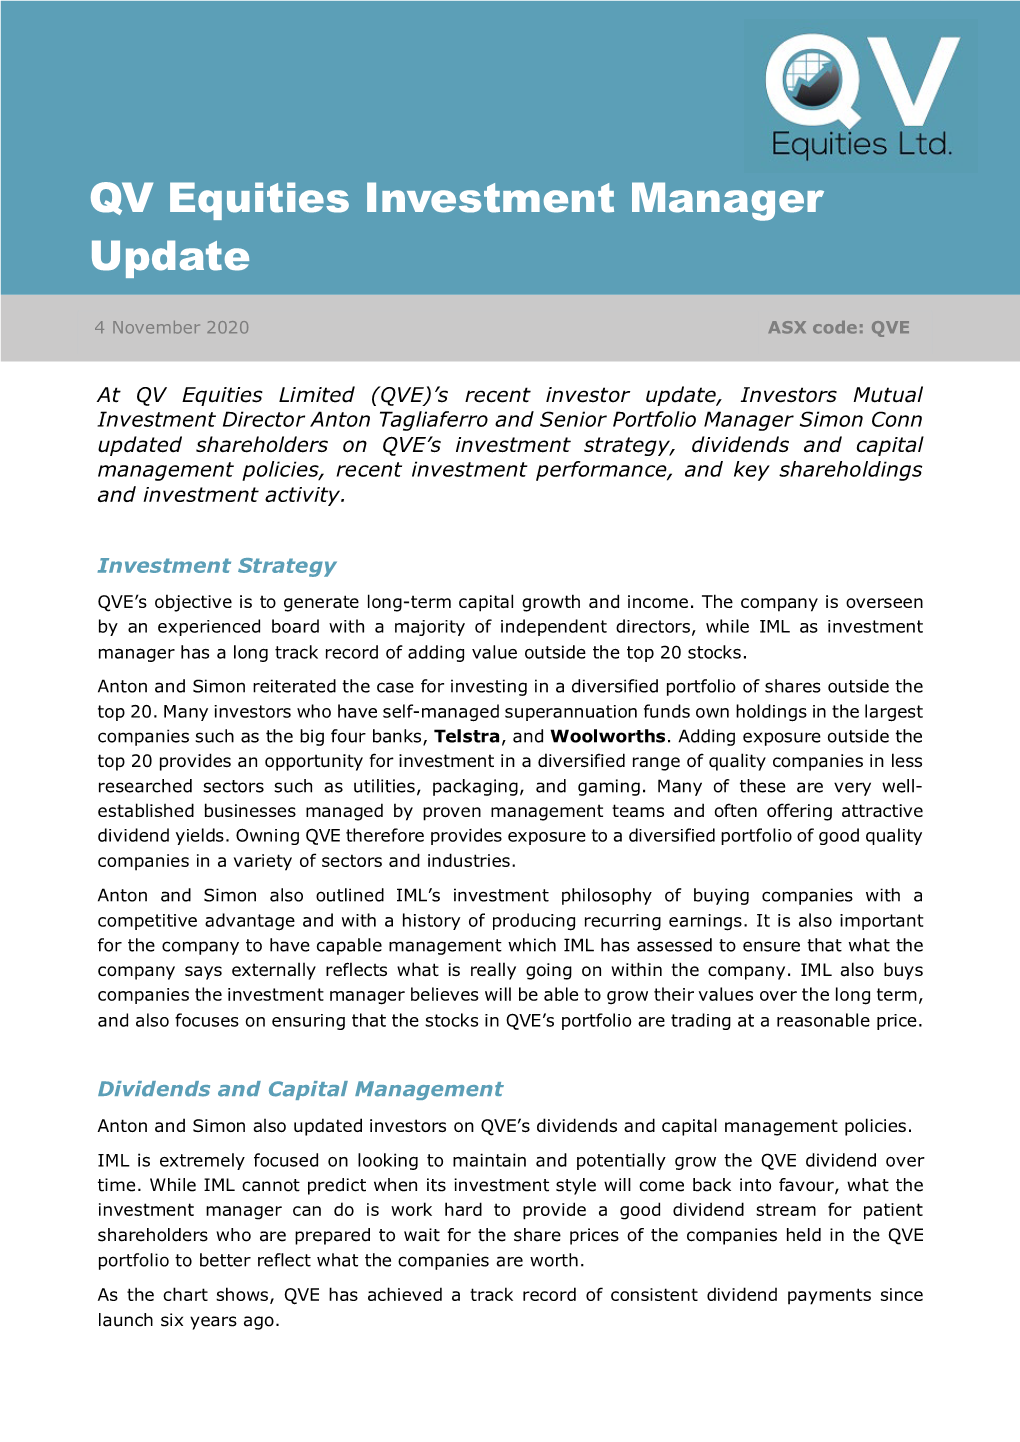 QV Equities Investment Manager Update